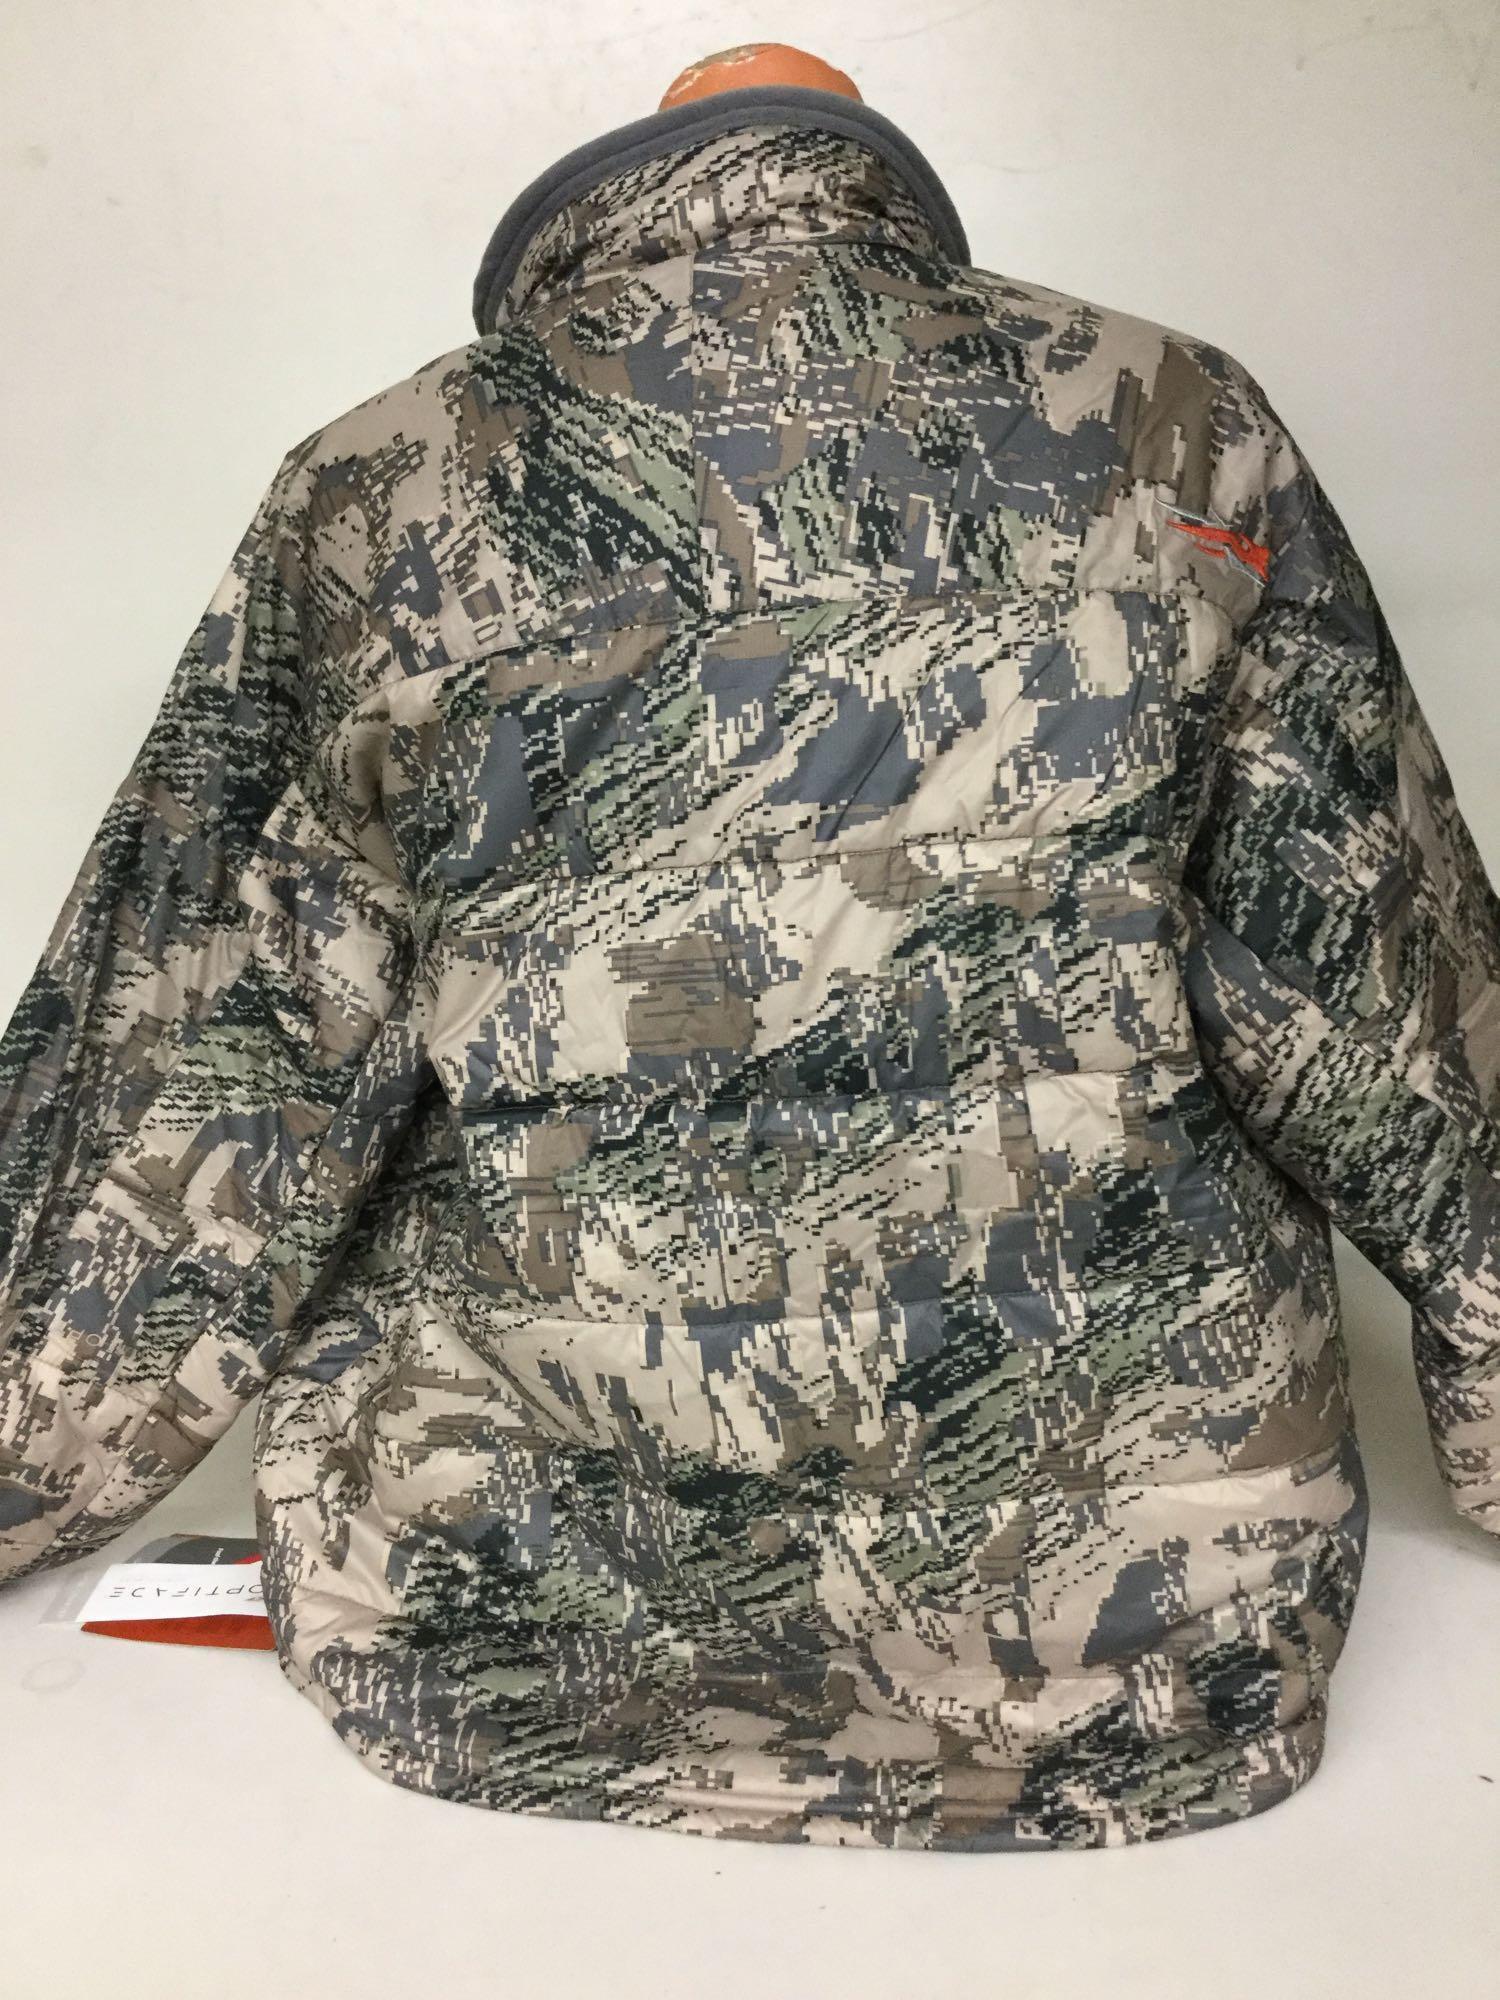 1 New Sitka Optifade Open Country Keivin Jacket.